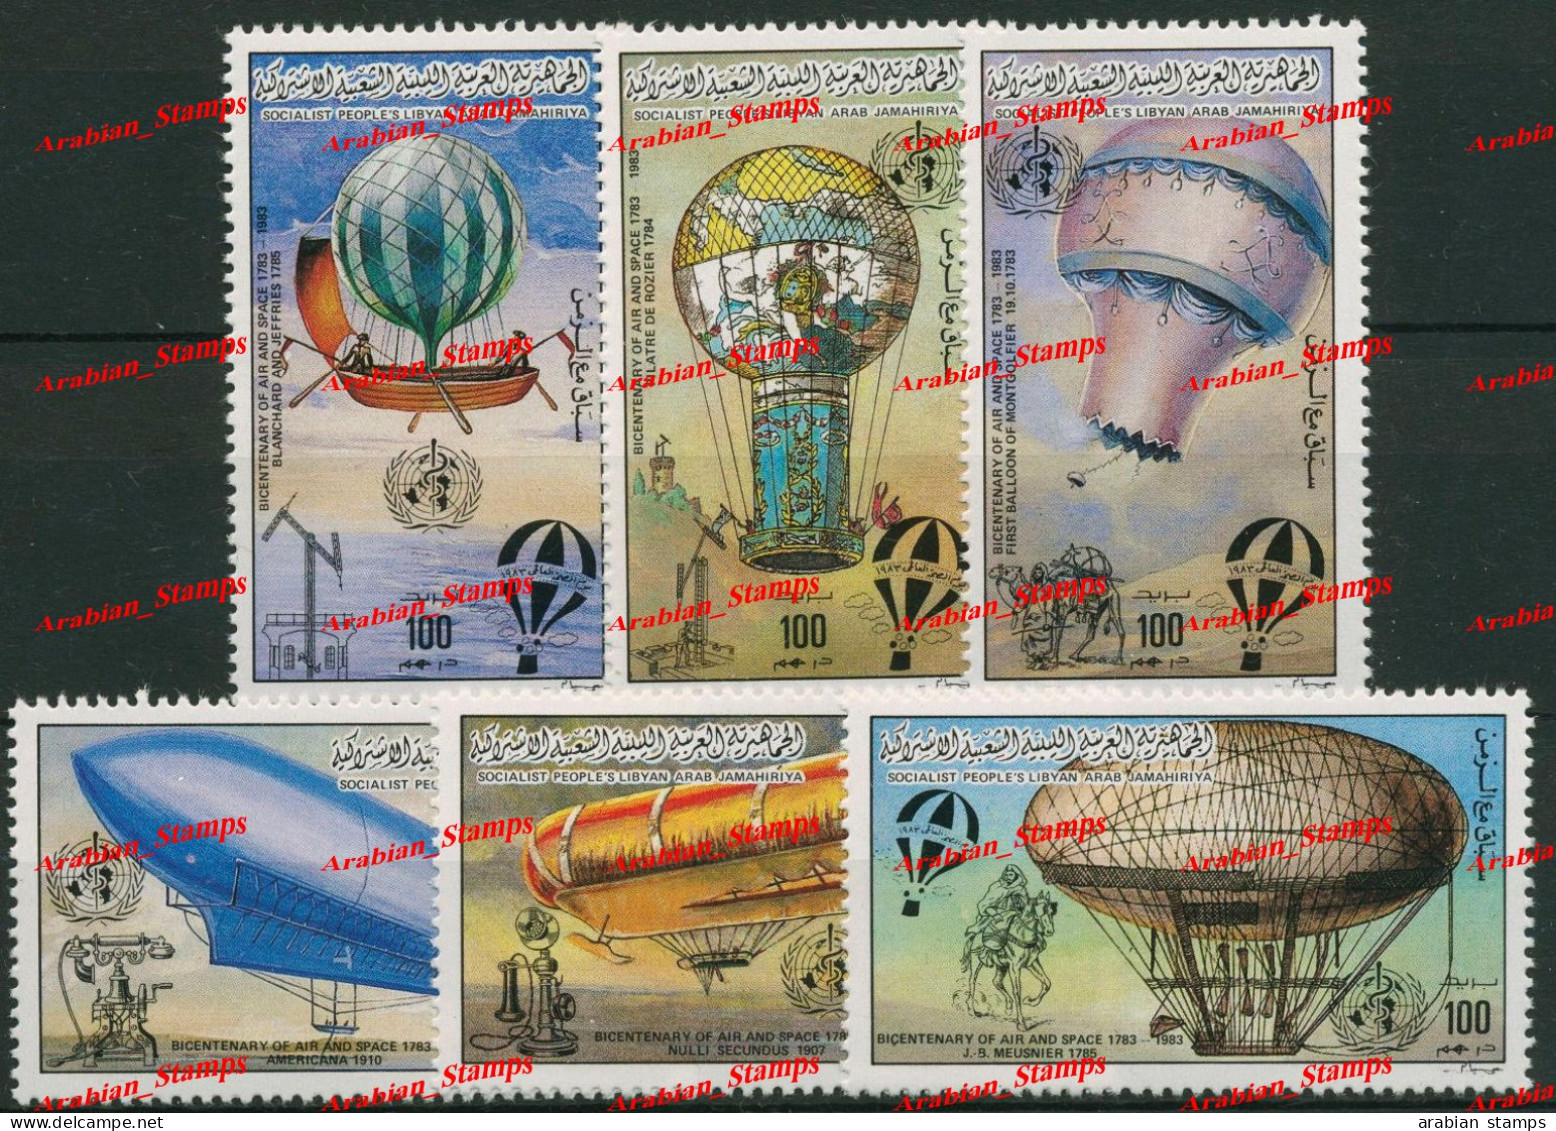 LIBYA 1983 MNH AIR AND SPACE BICENTENARY 1ST MANNED FLIGHT 200TH ZEPPELIN  AIR BALLOON AEROSTAT JOINT ISSUE - Libya